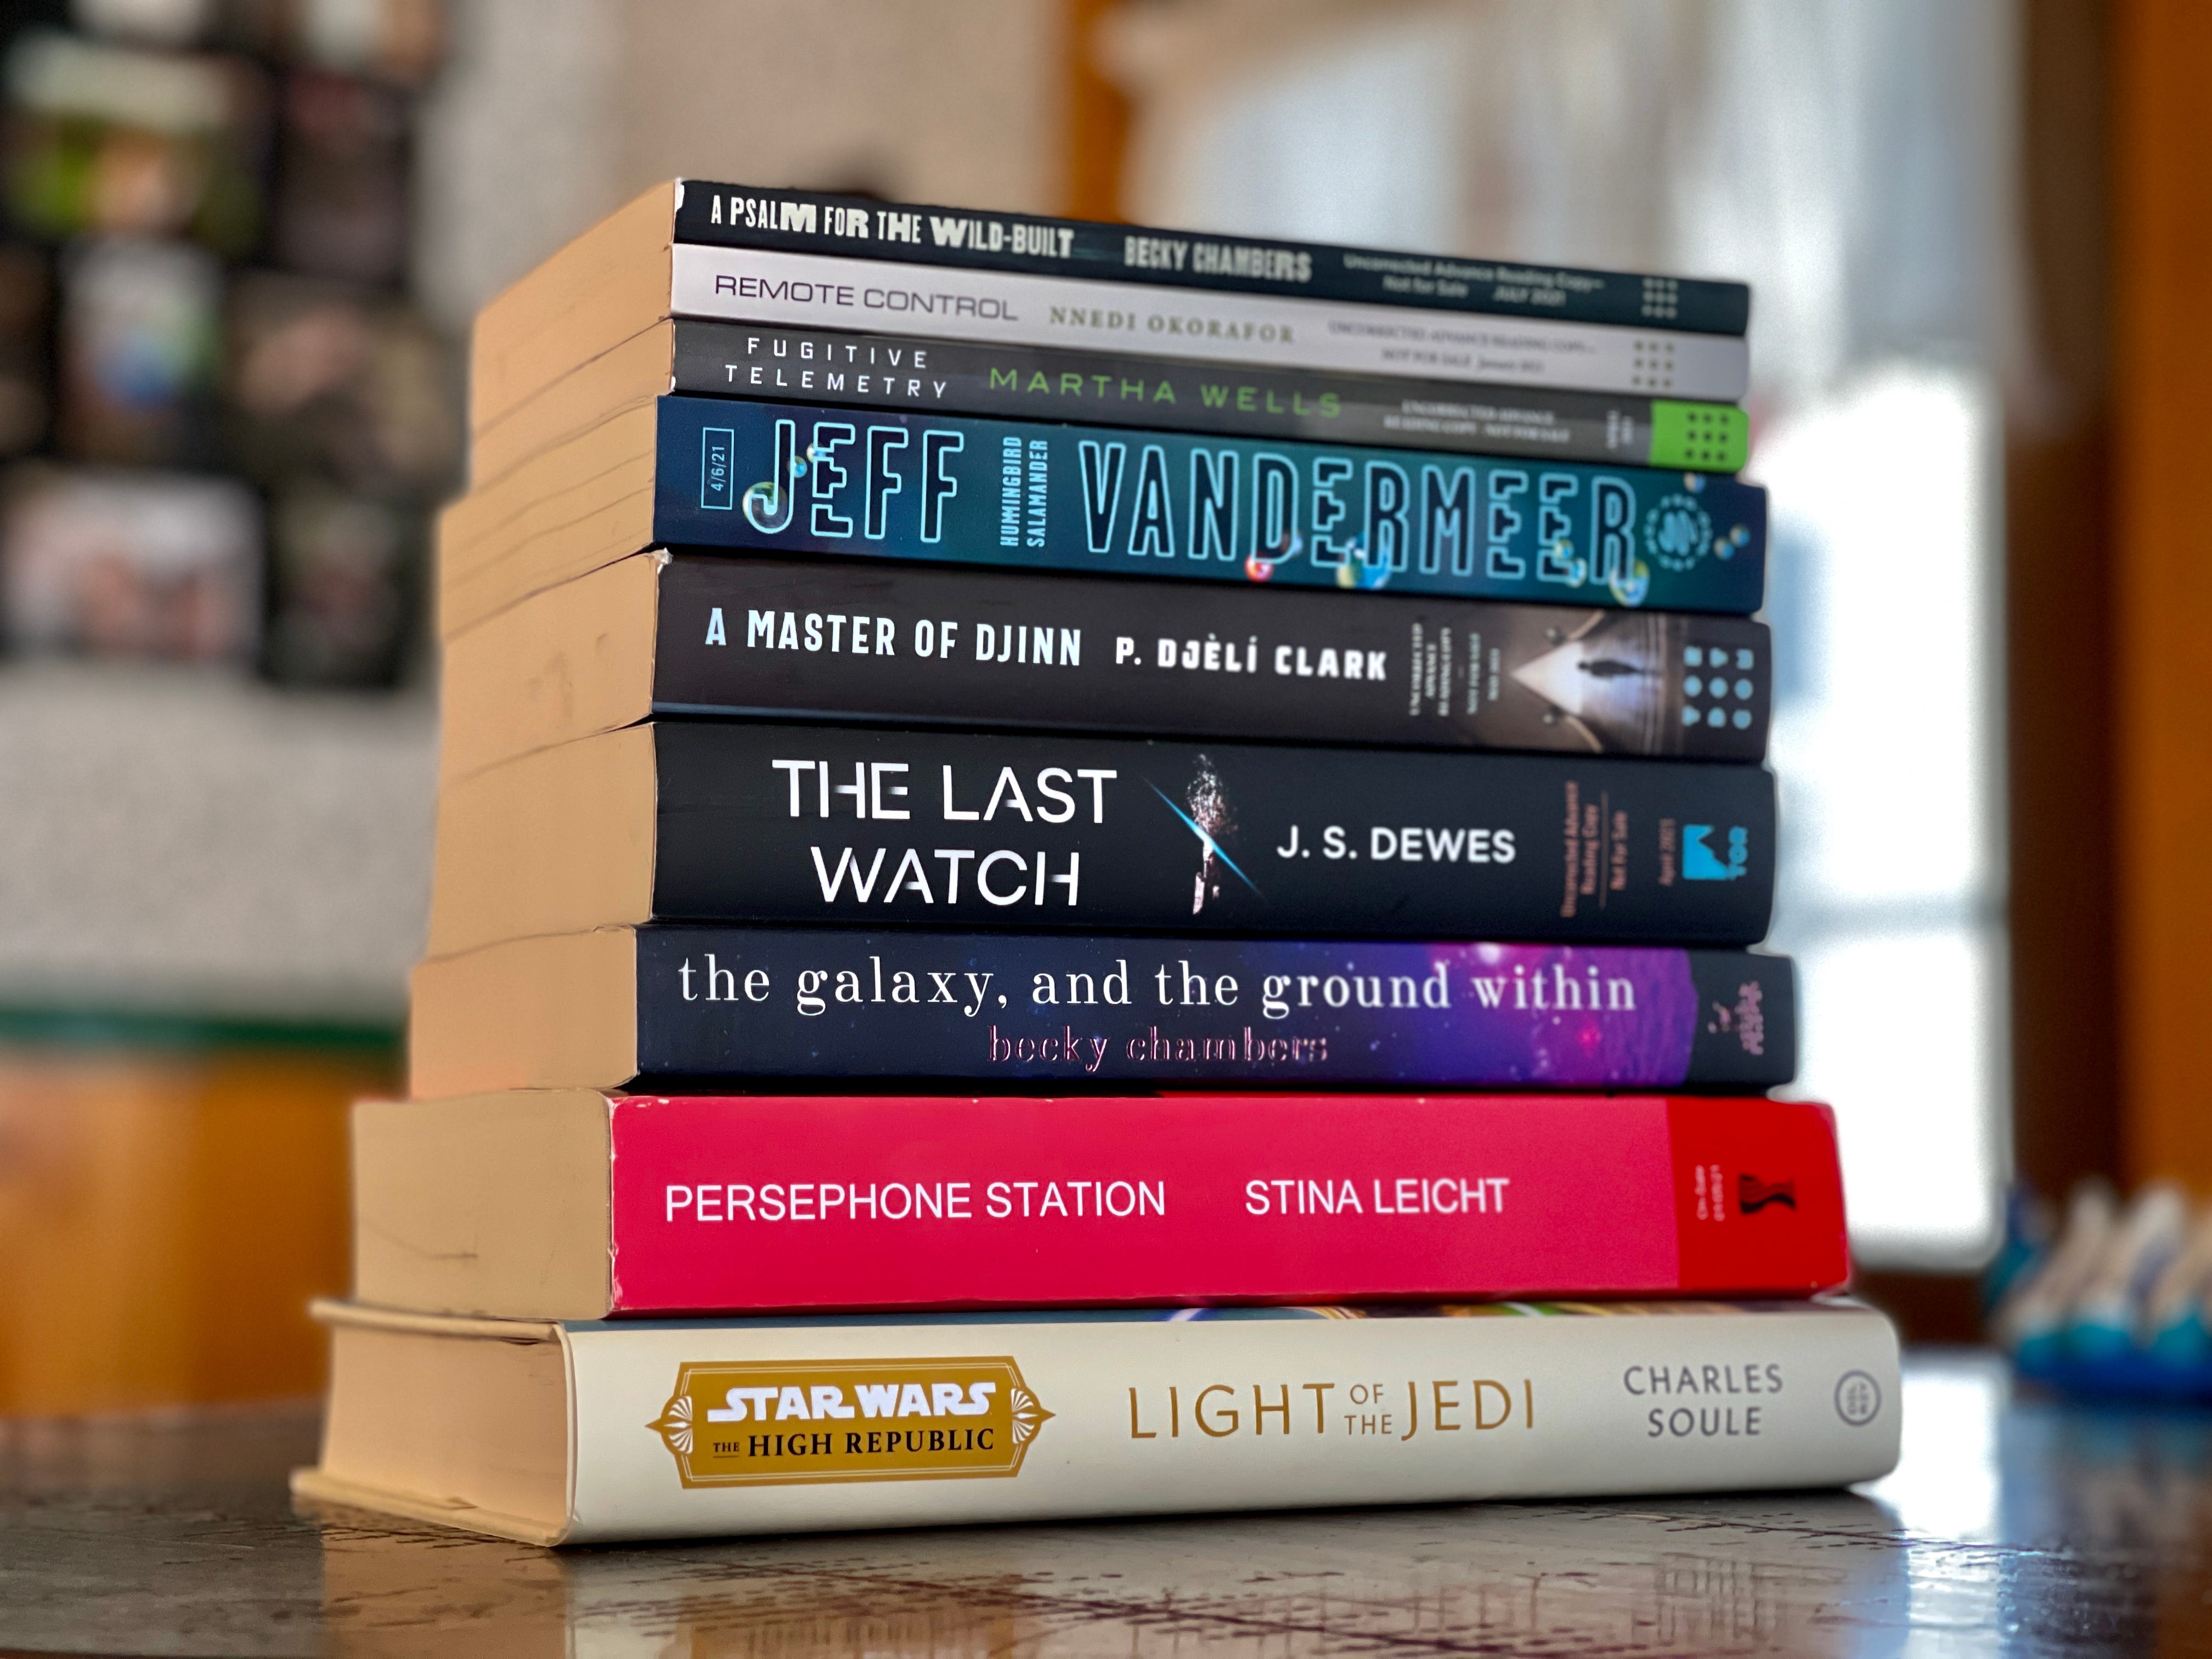 My most anticipated SF/F reads for 2021 - by Andrew Liptak